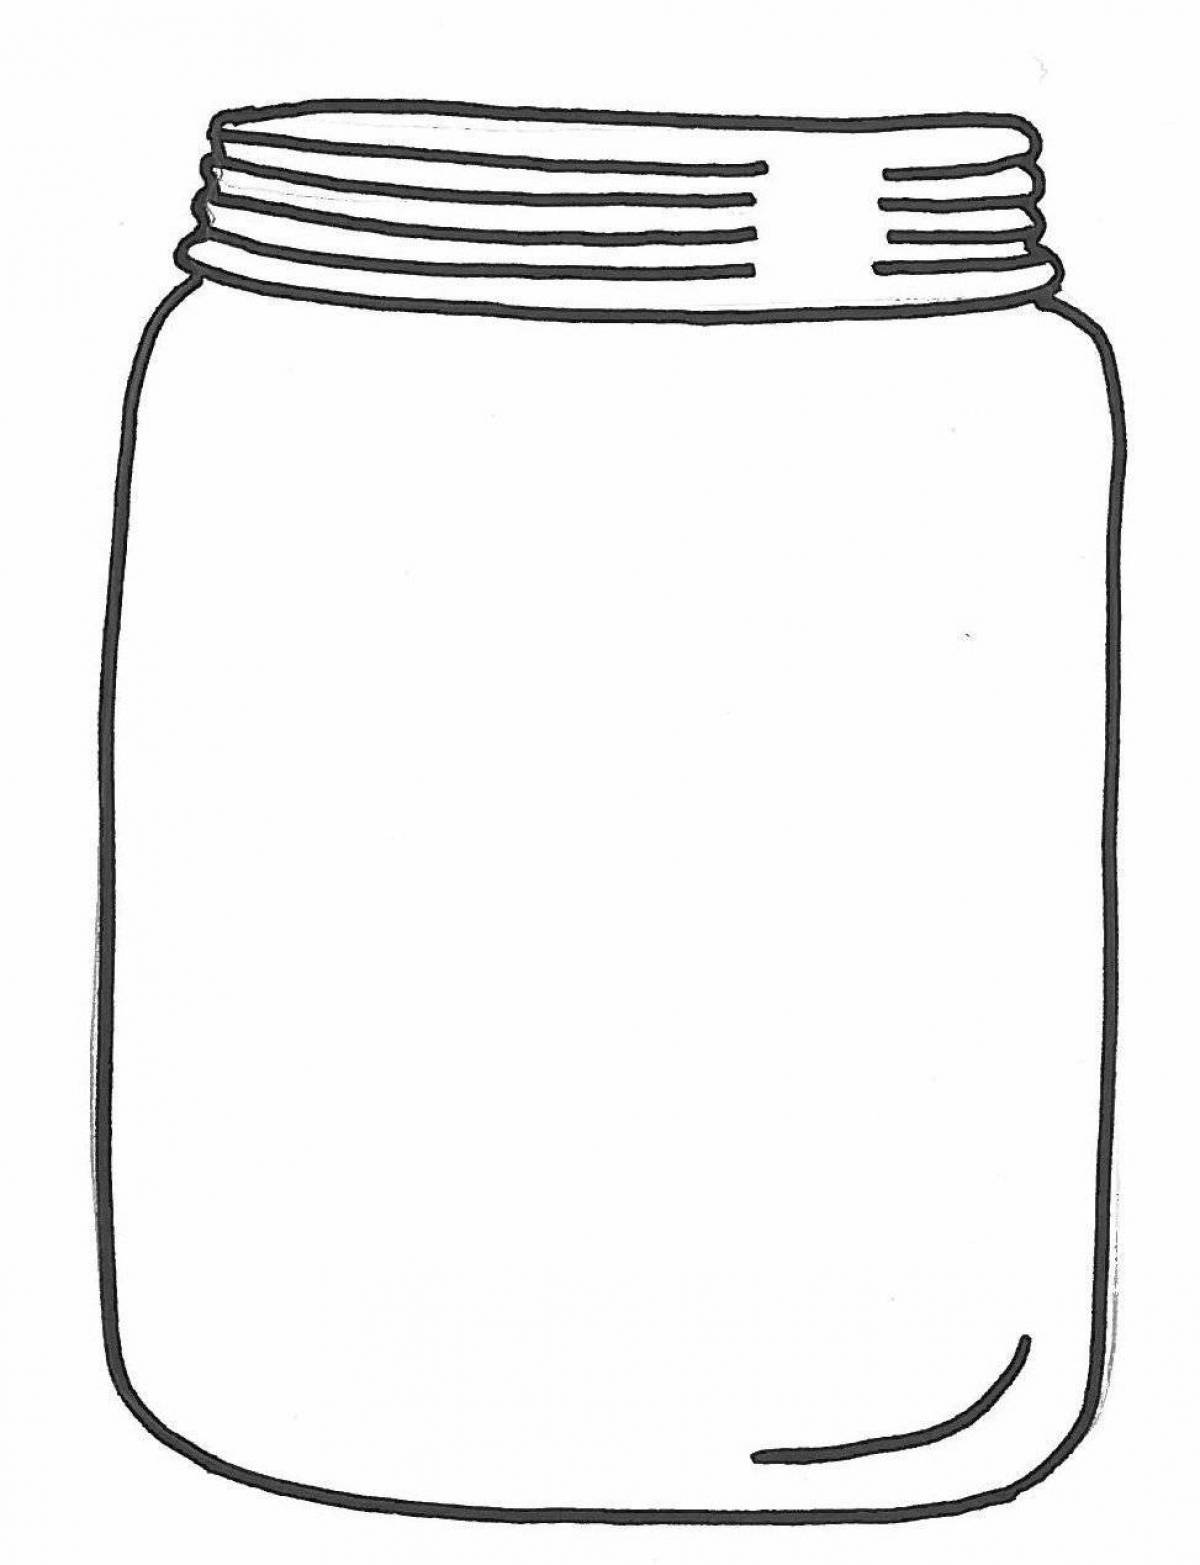 Coloring page with colorful jar